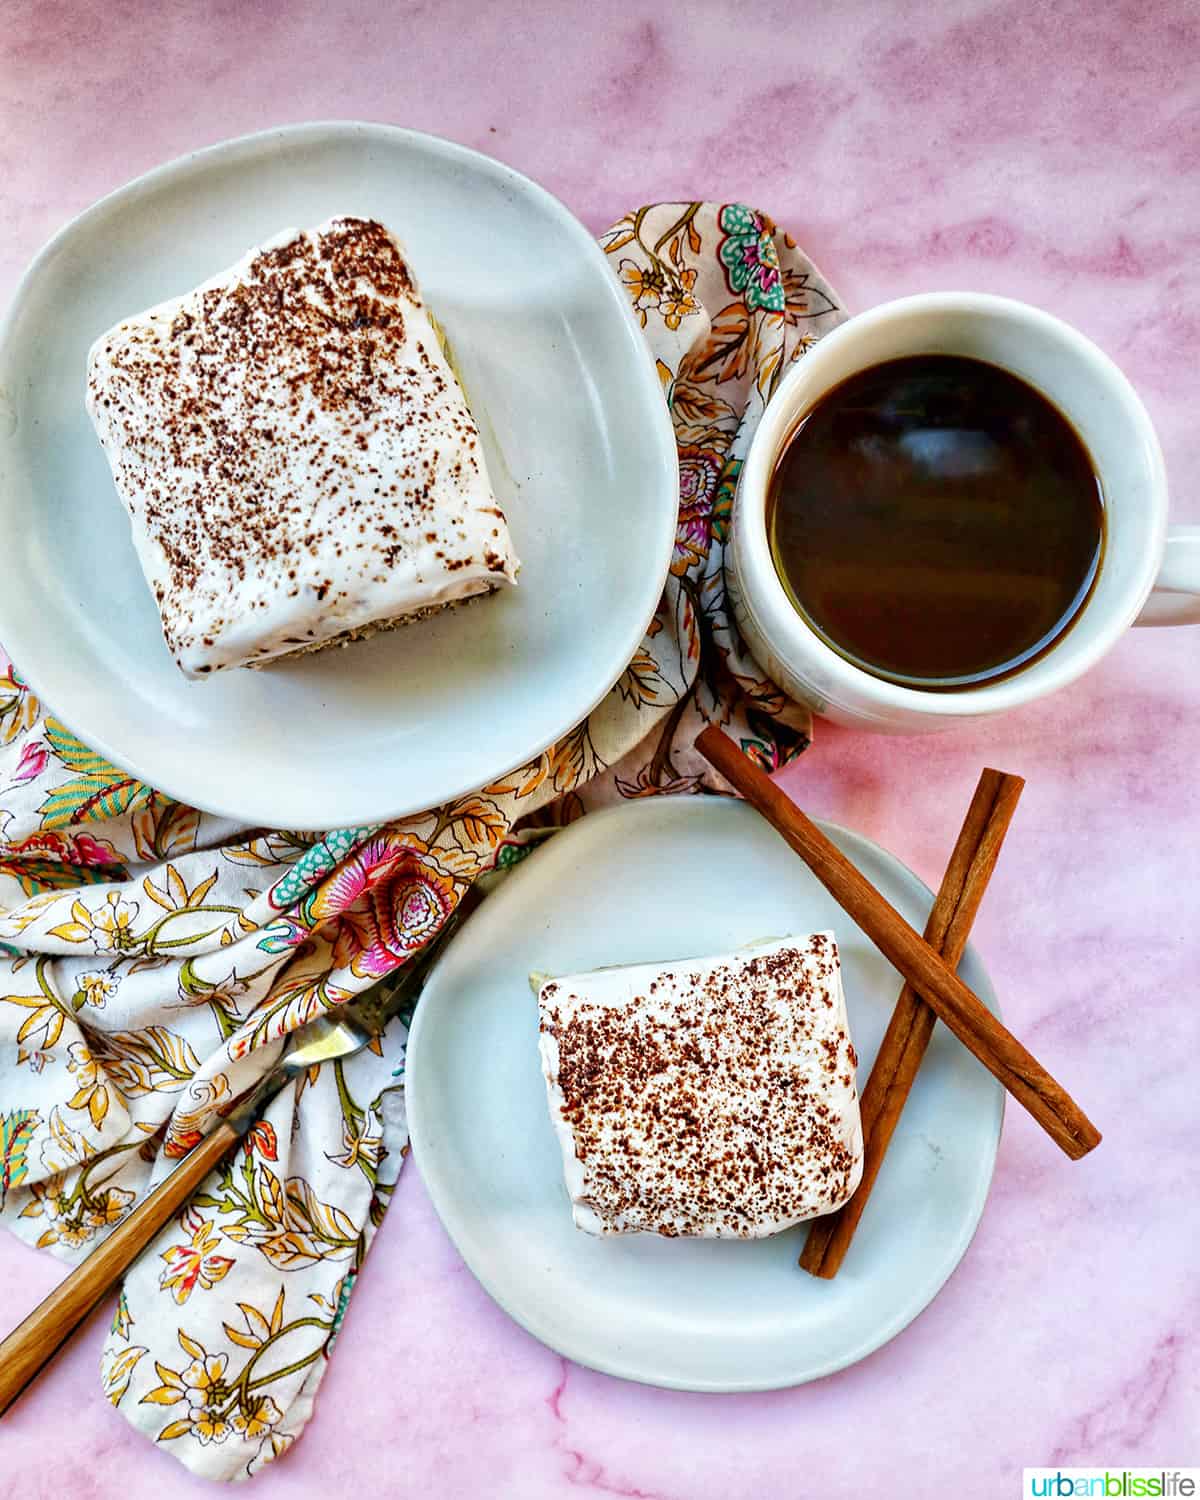 two plates of dairy free tiramisu dessert with a cup of coffee, fork, napkins, and cinnamon sticks.